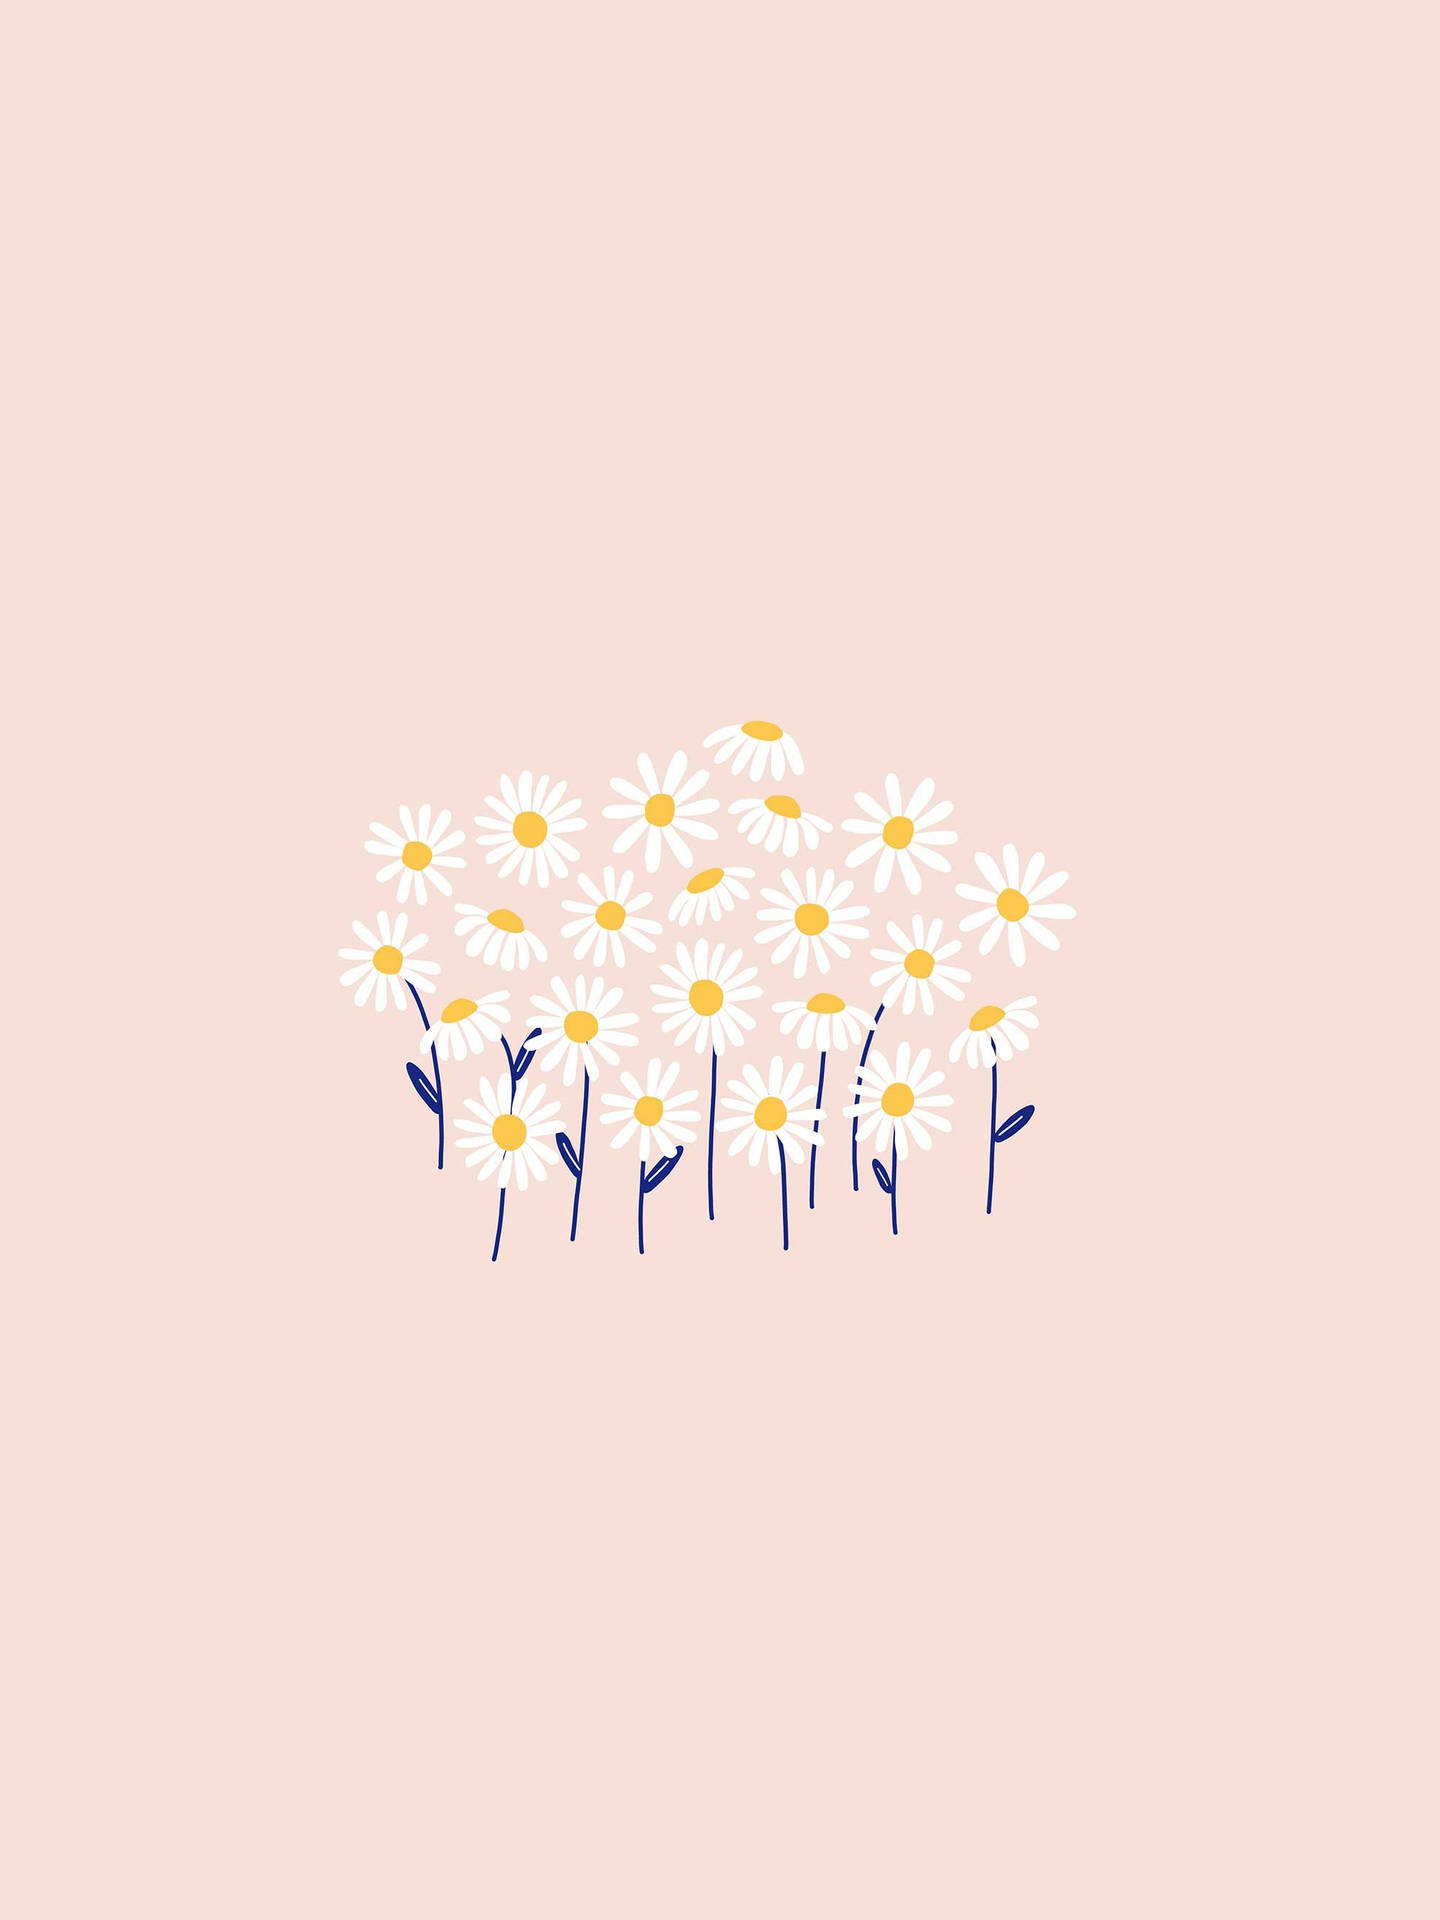 Modern Minimalist Tablet with Daisies Background Wallpaper